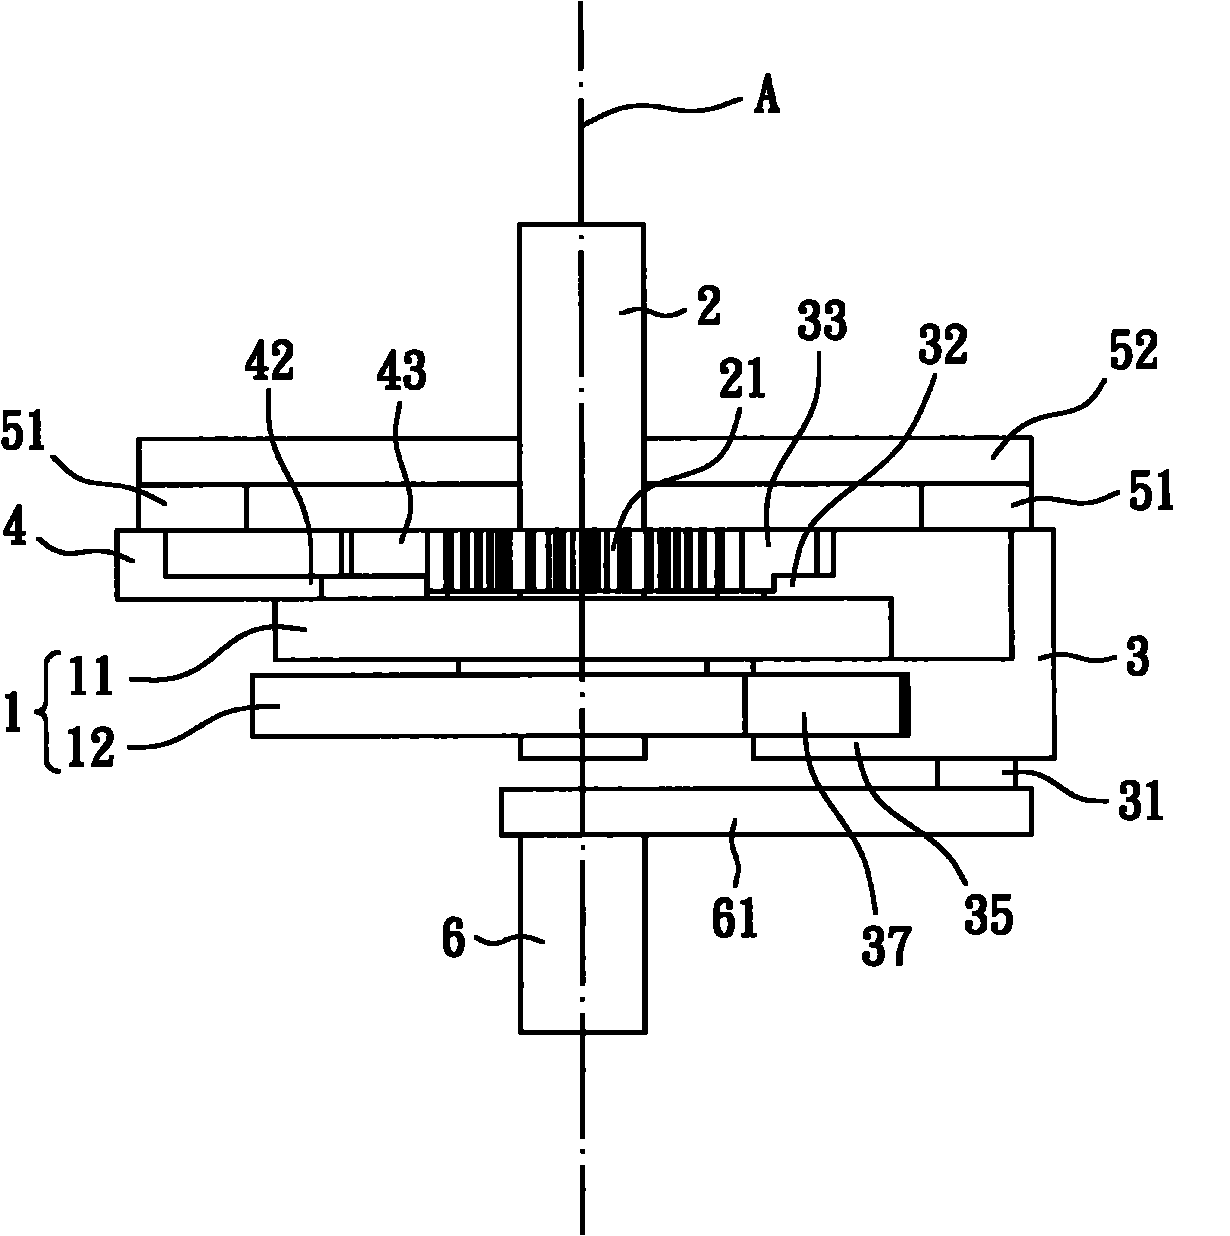 Transmission mechanism with intermittent output action